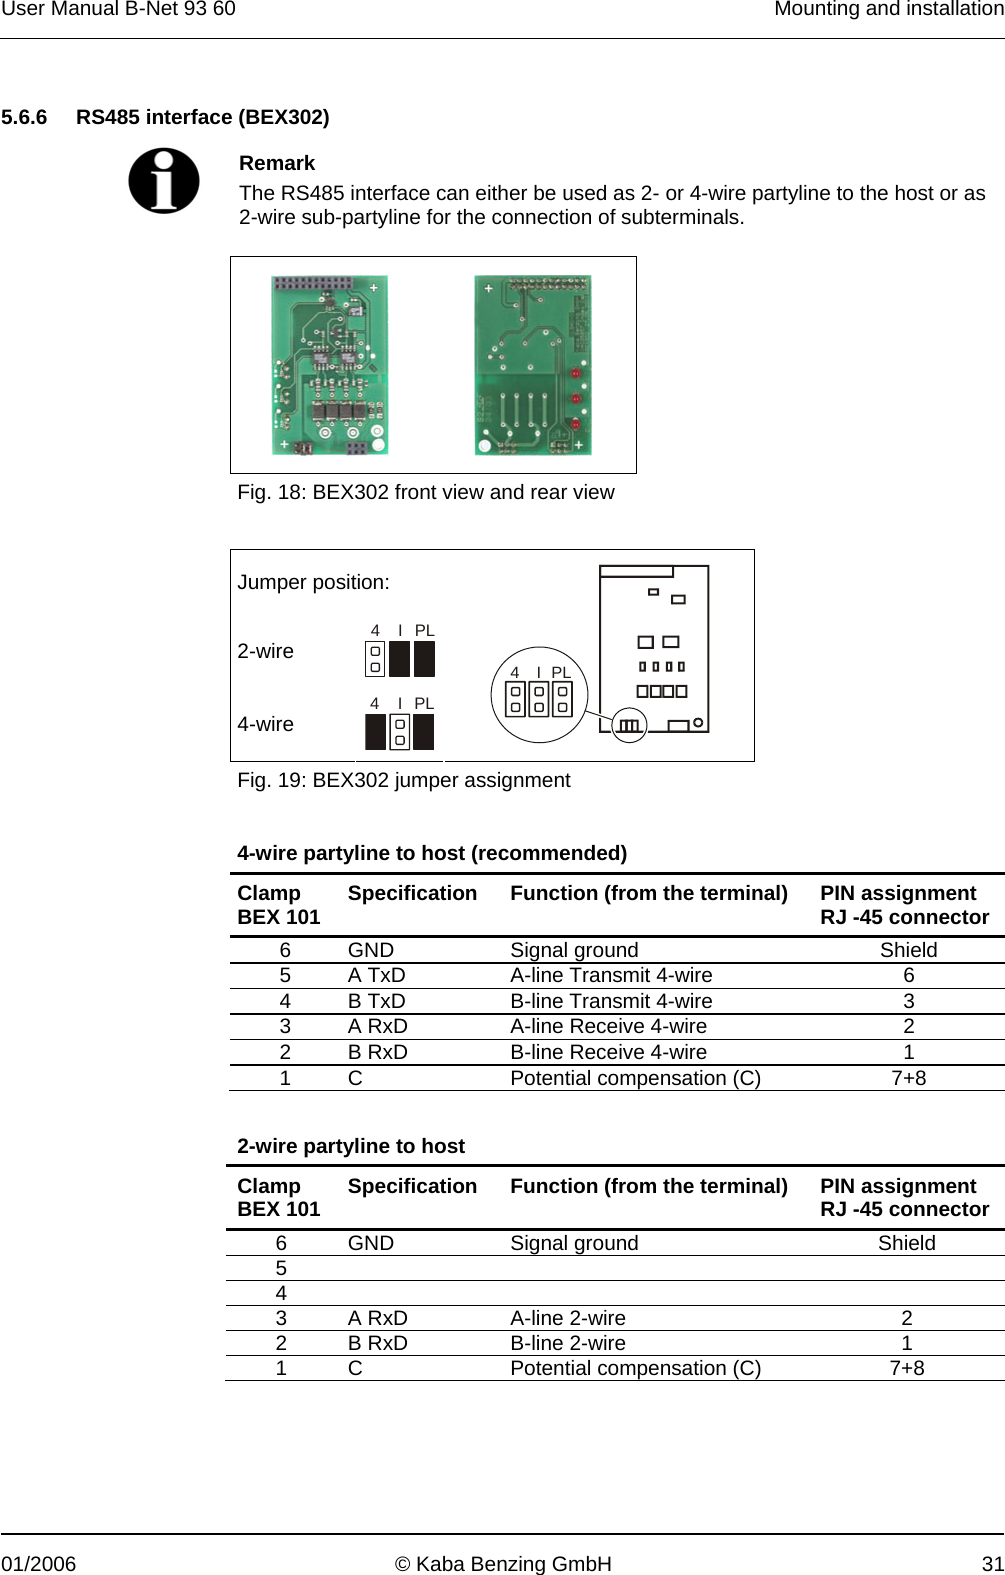 User Manual B-Net 93 60   Mounting and installation  01/2006  © Kaba Benzing GmbH  31   5.6.6  RS485 interface (BEX302)    Remark The RS485 interface can either be used as 2- or 4-wire partyline to the host or as  2-wire sub-partyline for the connection of subterminals.       Fig. 18: BEX302 front view and rear view   Jumper position: 2-wire 4PLI4-wire 4PLI4PLI Fig. 19: BEX302 jumper assignment  4-wire partyline to host (recommended) Clamp BEX 101  Specification Function (from the terminal)  PIN assignment RJ -45 connector 6 GND  Signal ground  Shield 5  A TxD  A-line Transmit 4-wire  6 4  B TxD  B-line Transmit 4-wire  3 3  A RxD  A-line Receive 4-wire  2 2  B RxD  B-line Receive 4-wire  1 1  C  Potential compensation (C)  7+8  2-wire partyline to host Clamp BEX 101  Specification Function (from the terminal)  PIN assignment RJ -45 connector 6 GND  Signal ground  Shield 5      4      3  A RxD  A-line 2-wire  2 2  B RxD  B-line 2-wire  1 1  C  Potential compensation (C)  7+8  